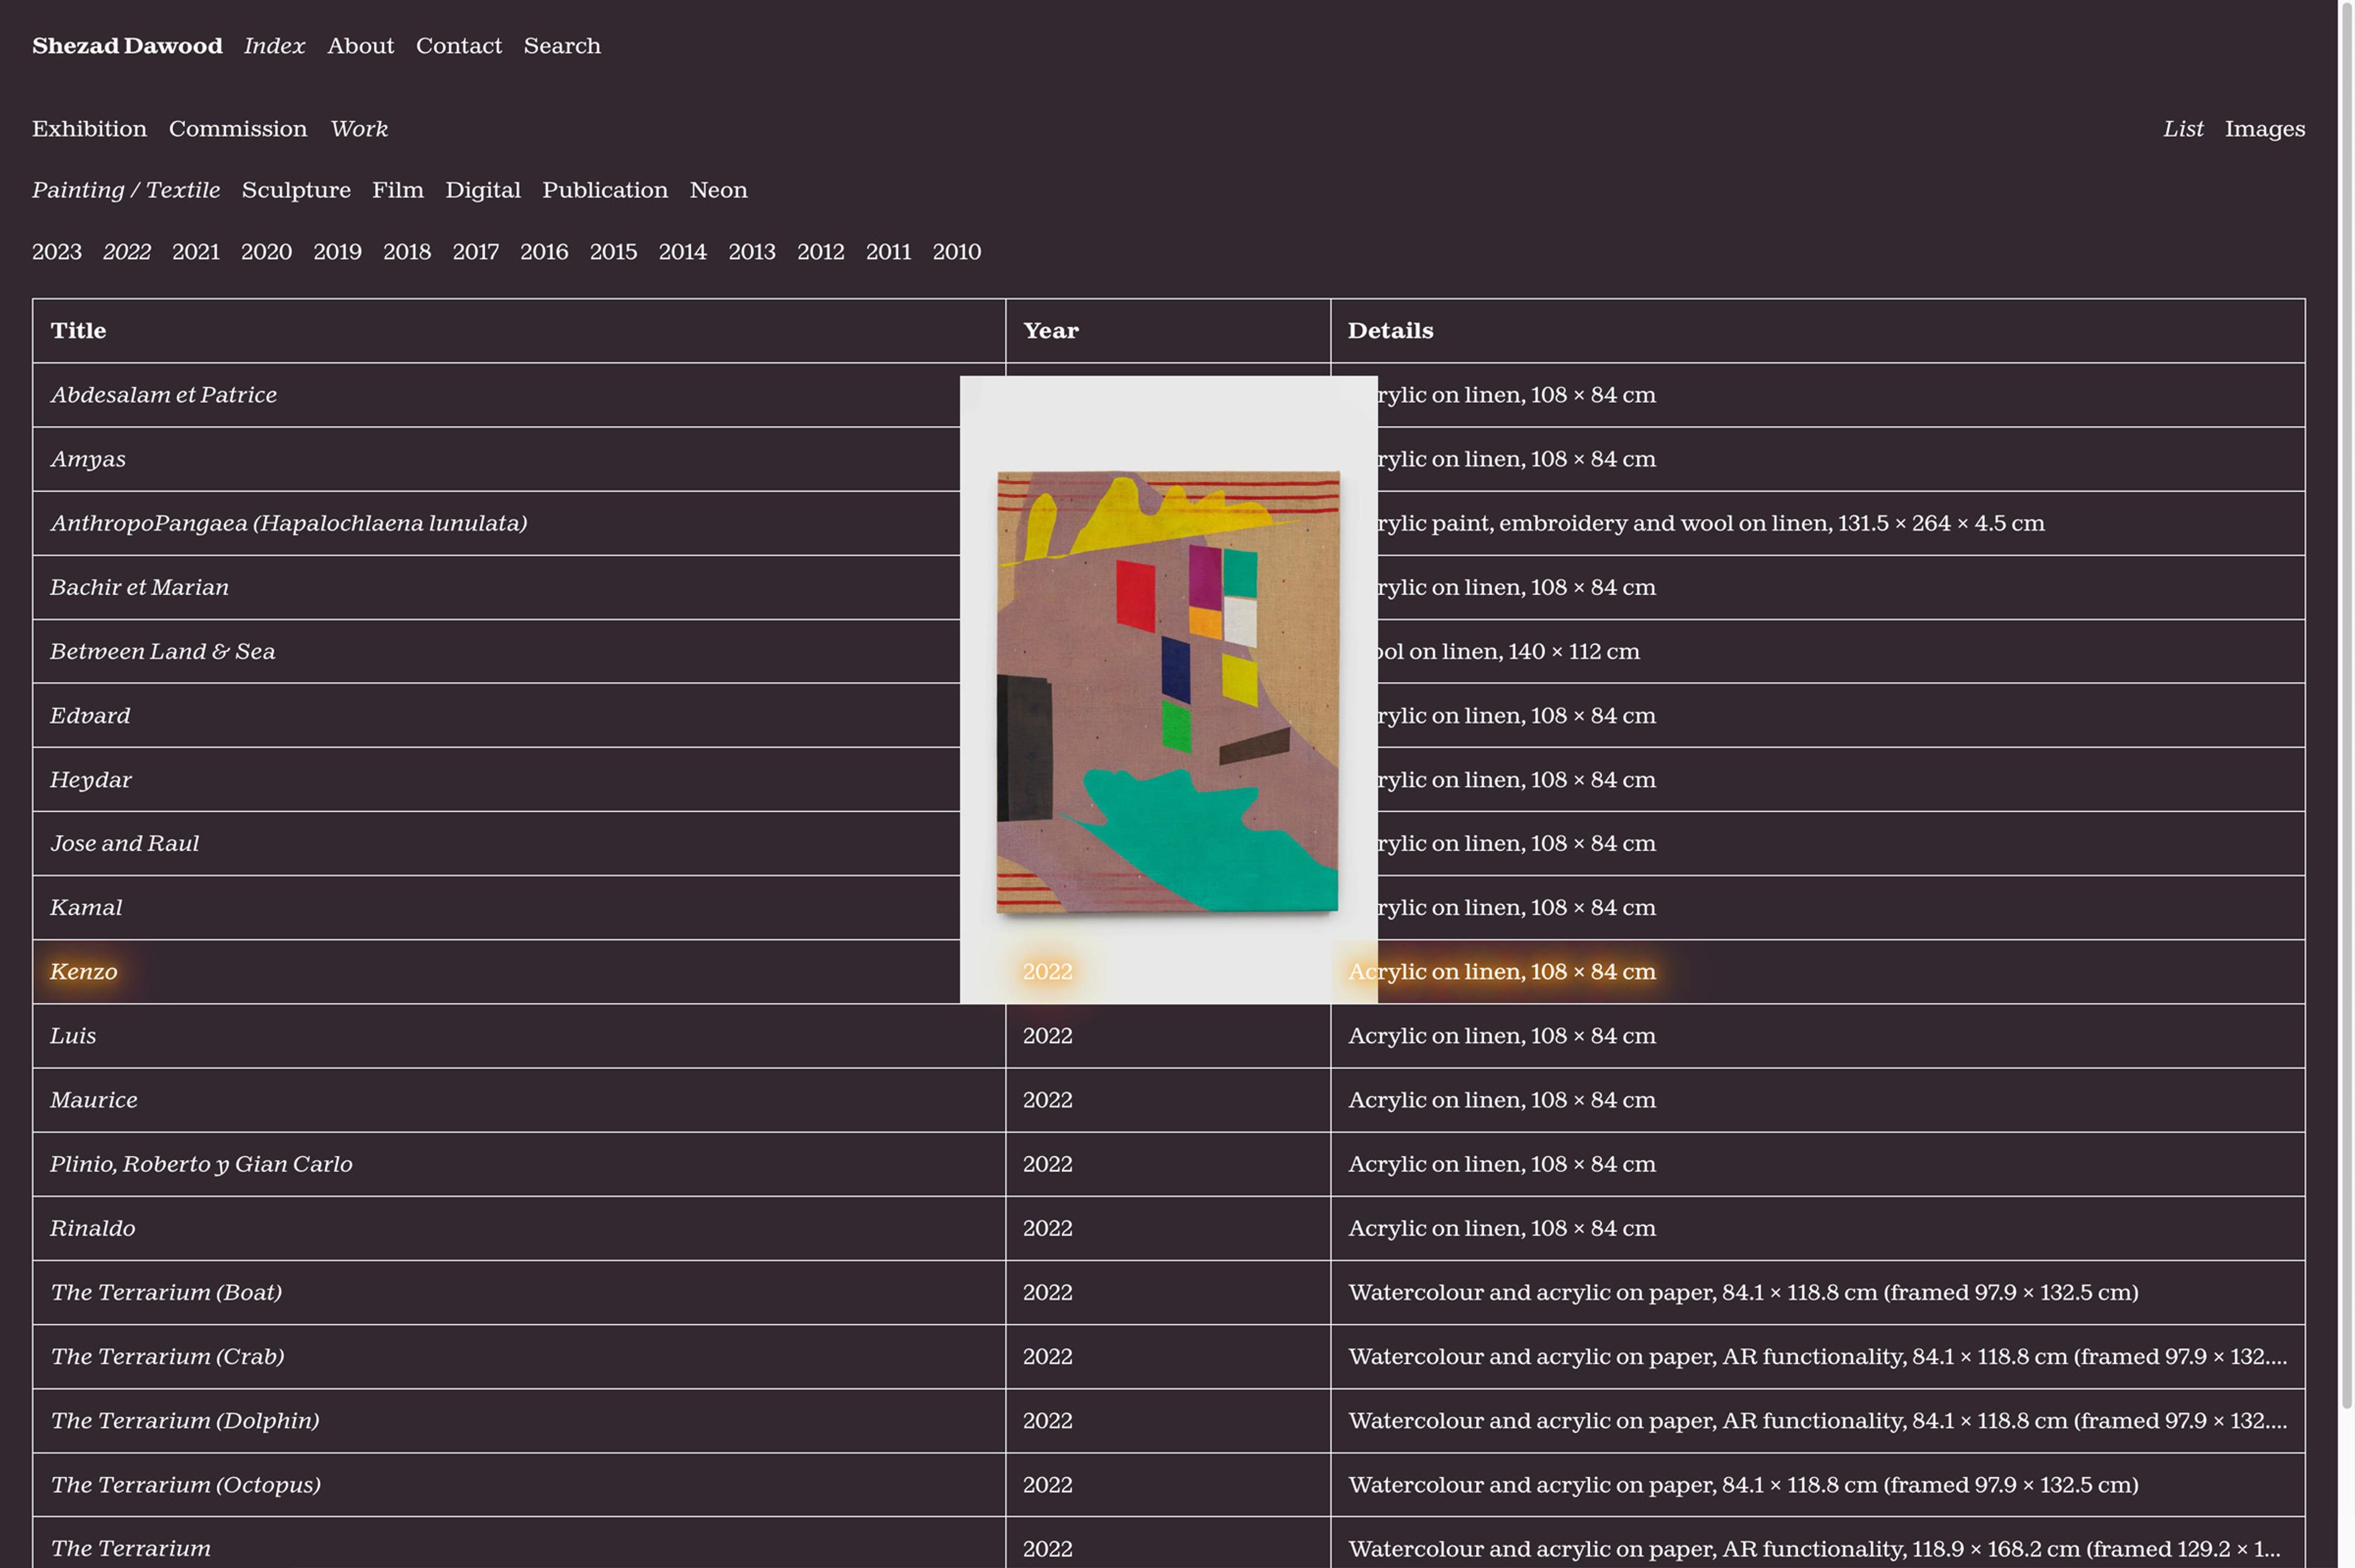 A screengrab of Shezad Dawood's website, showing a table indexing works, commissions and exhibitions